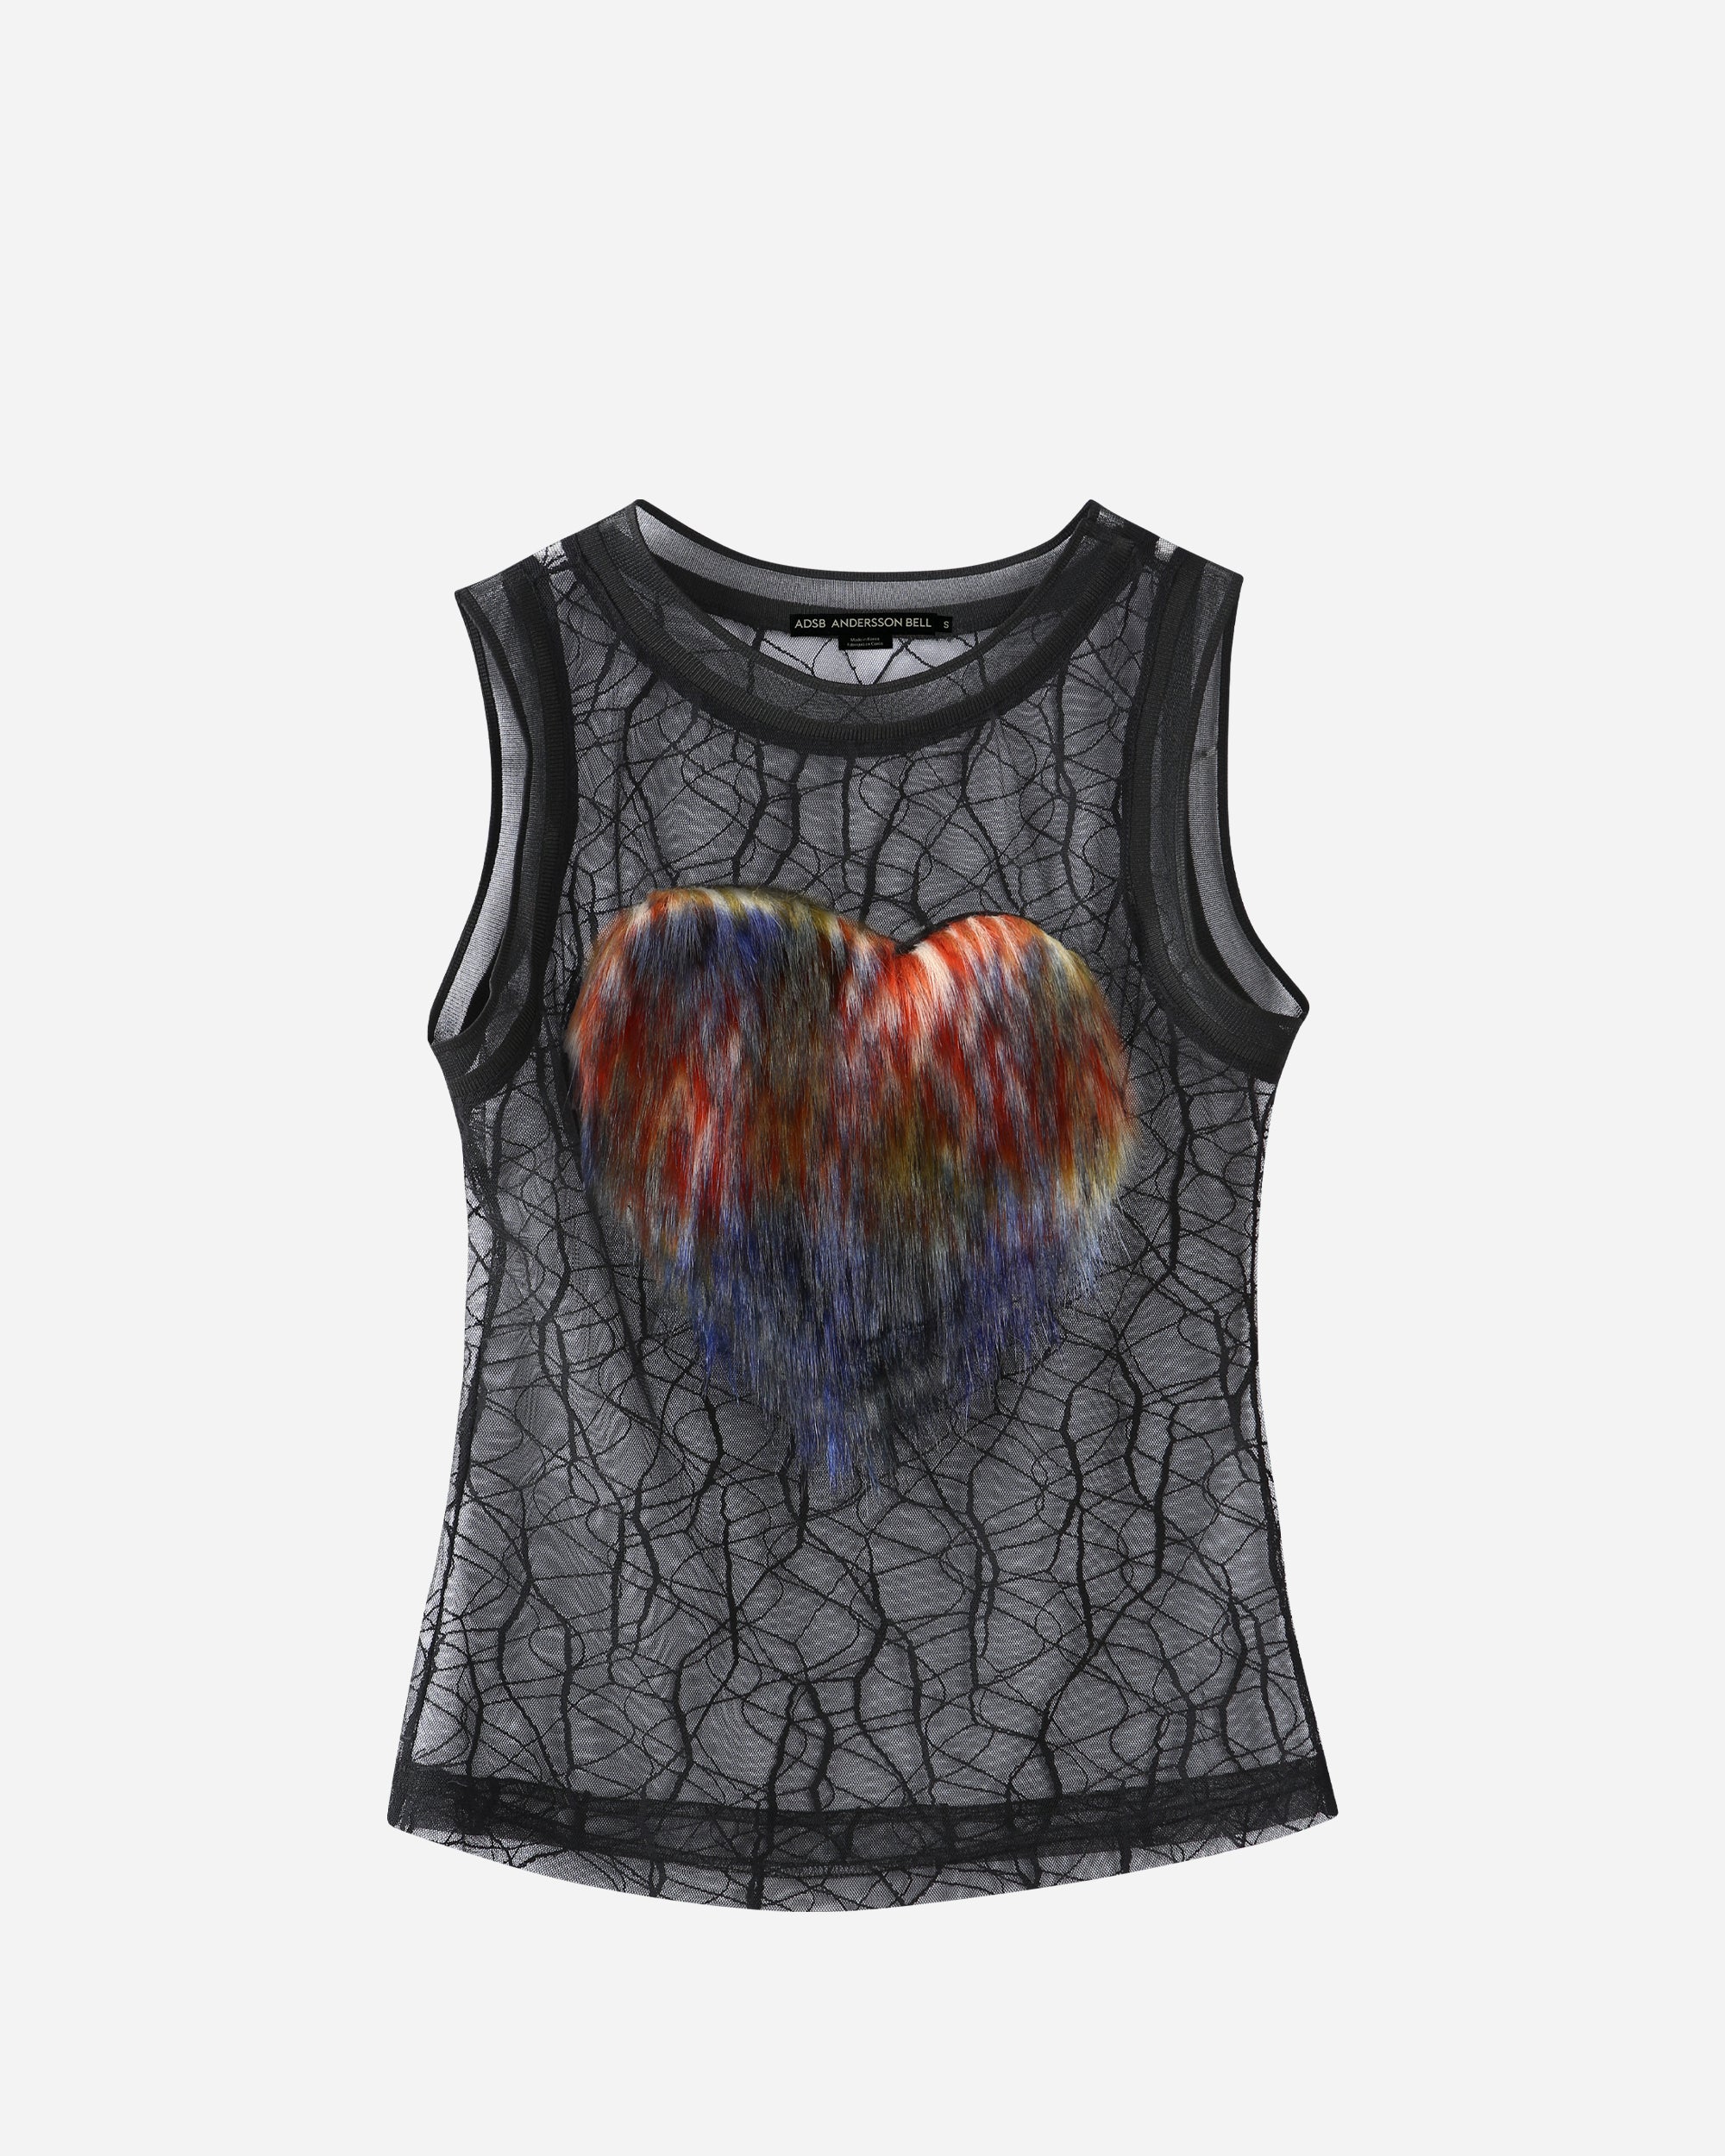 Andersson Bell Heart Fur Mesh Top BLACK atb984w-BLK